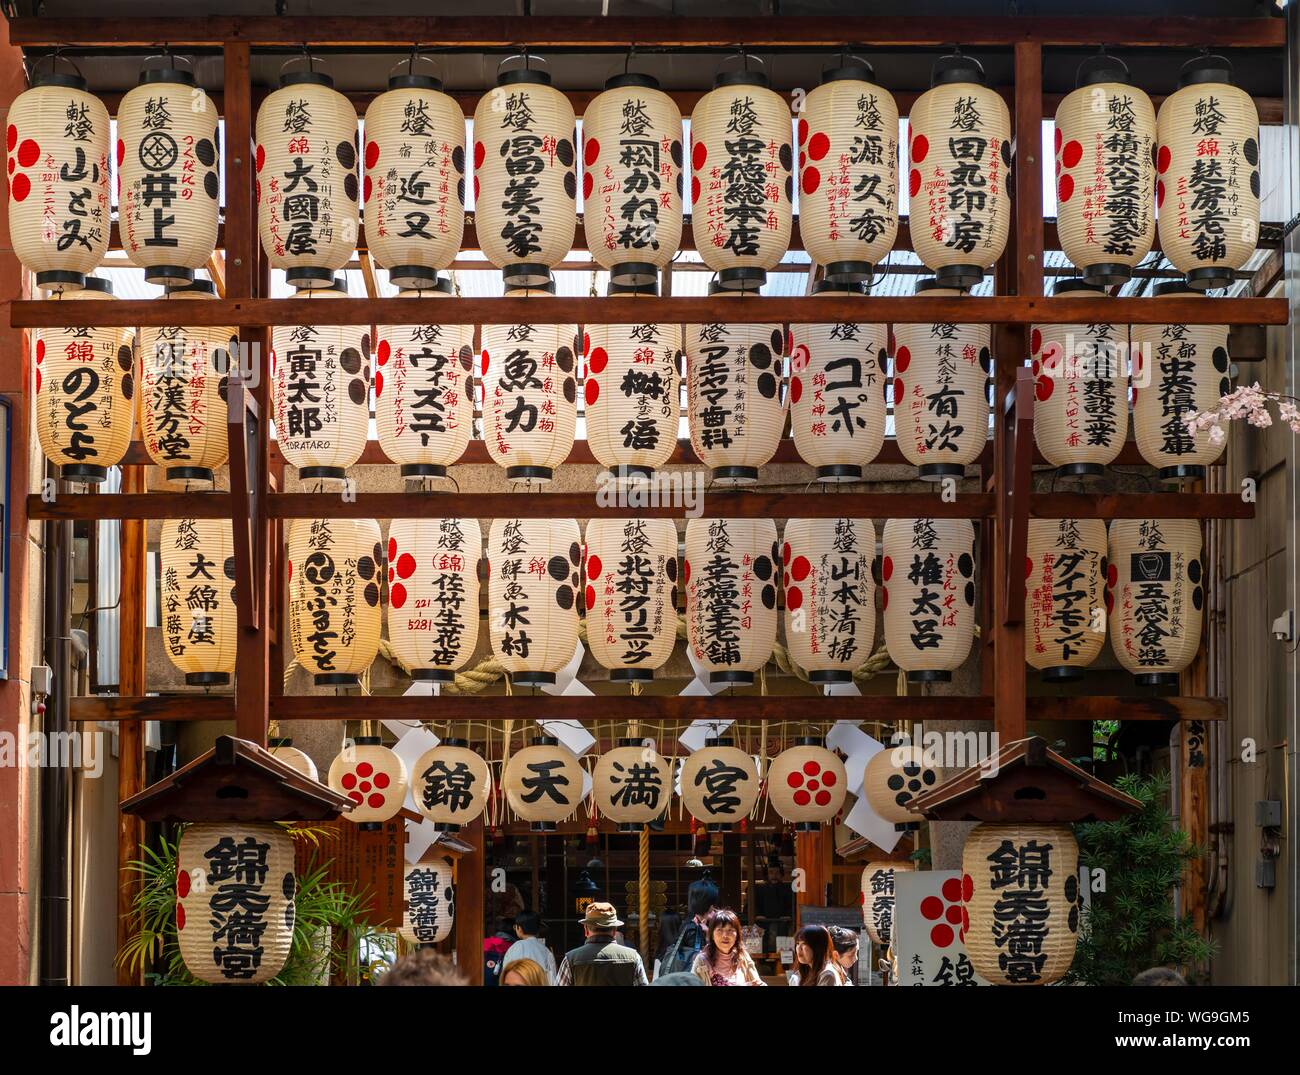 Japanese lanterns hanging in a passageway between houses, paper lamps with Japanese characters, Kyoto, Japan Stock Photo